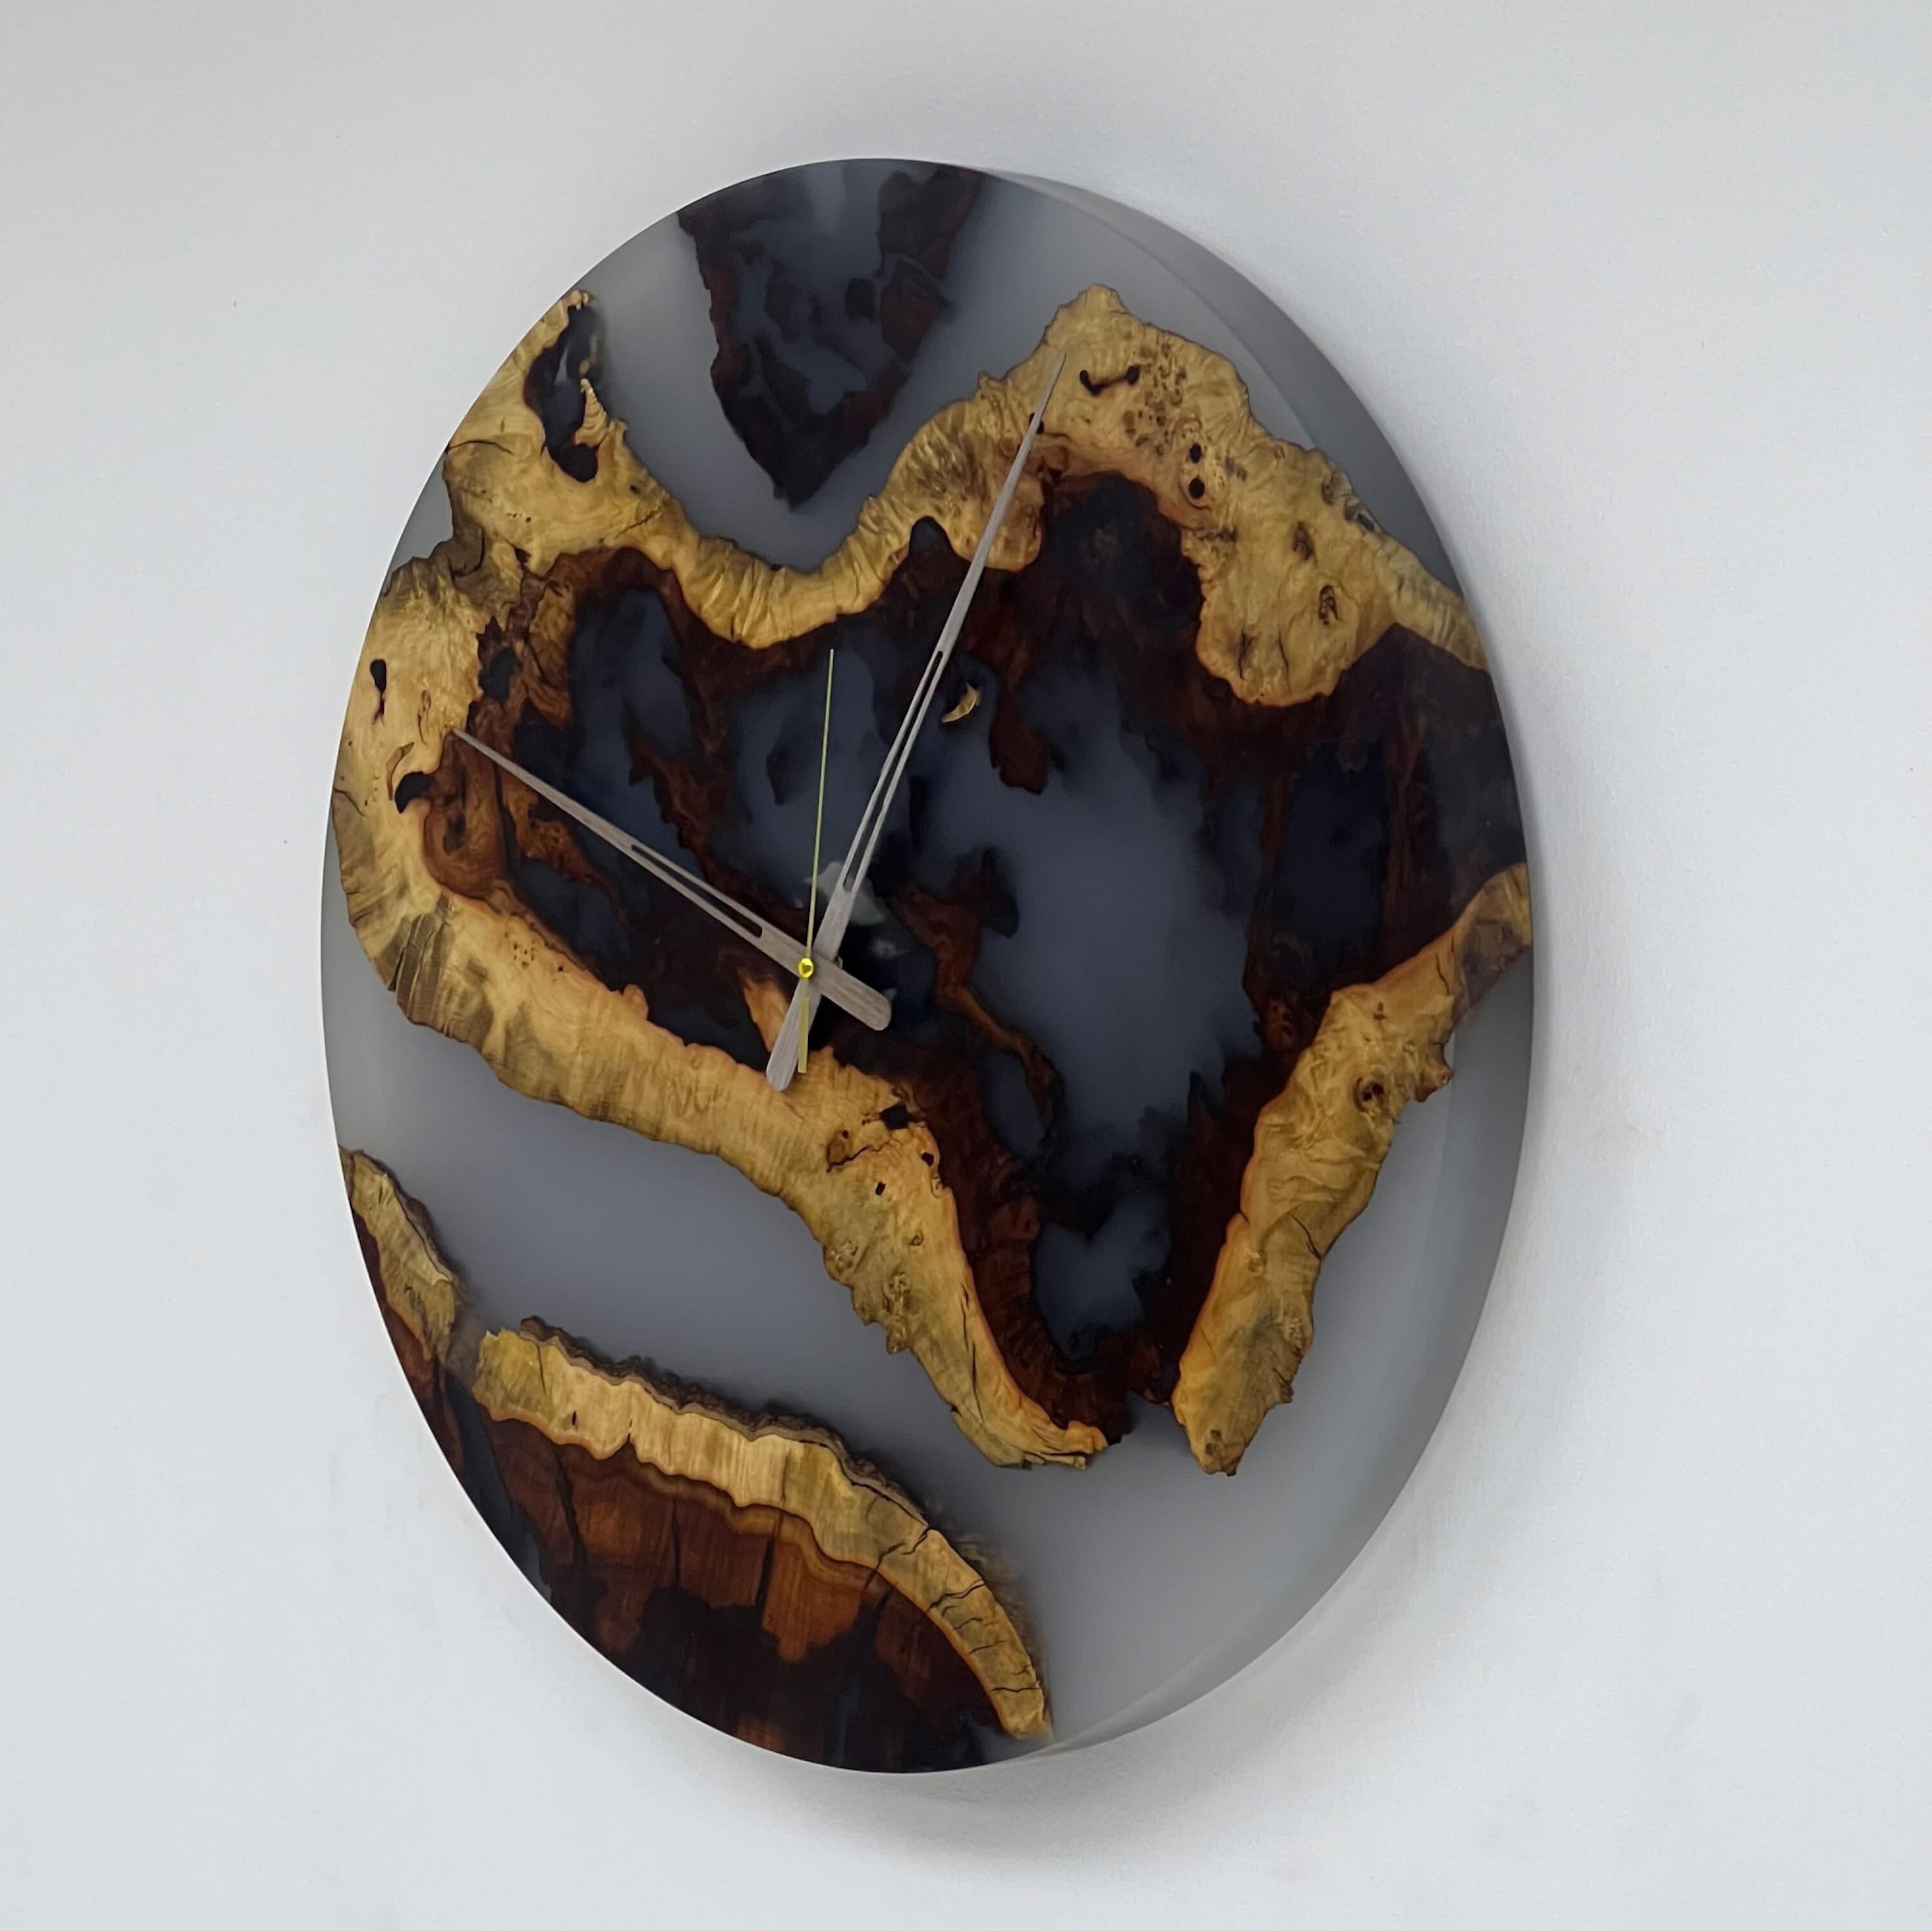 Here's a 650round clock for your wall. It's built from tough hackberry wood, and the clock face is smooth with clear marks for hours and minutes.

To make it look even fancier, the clock face got a shiny coating called epoxy resin. This not only